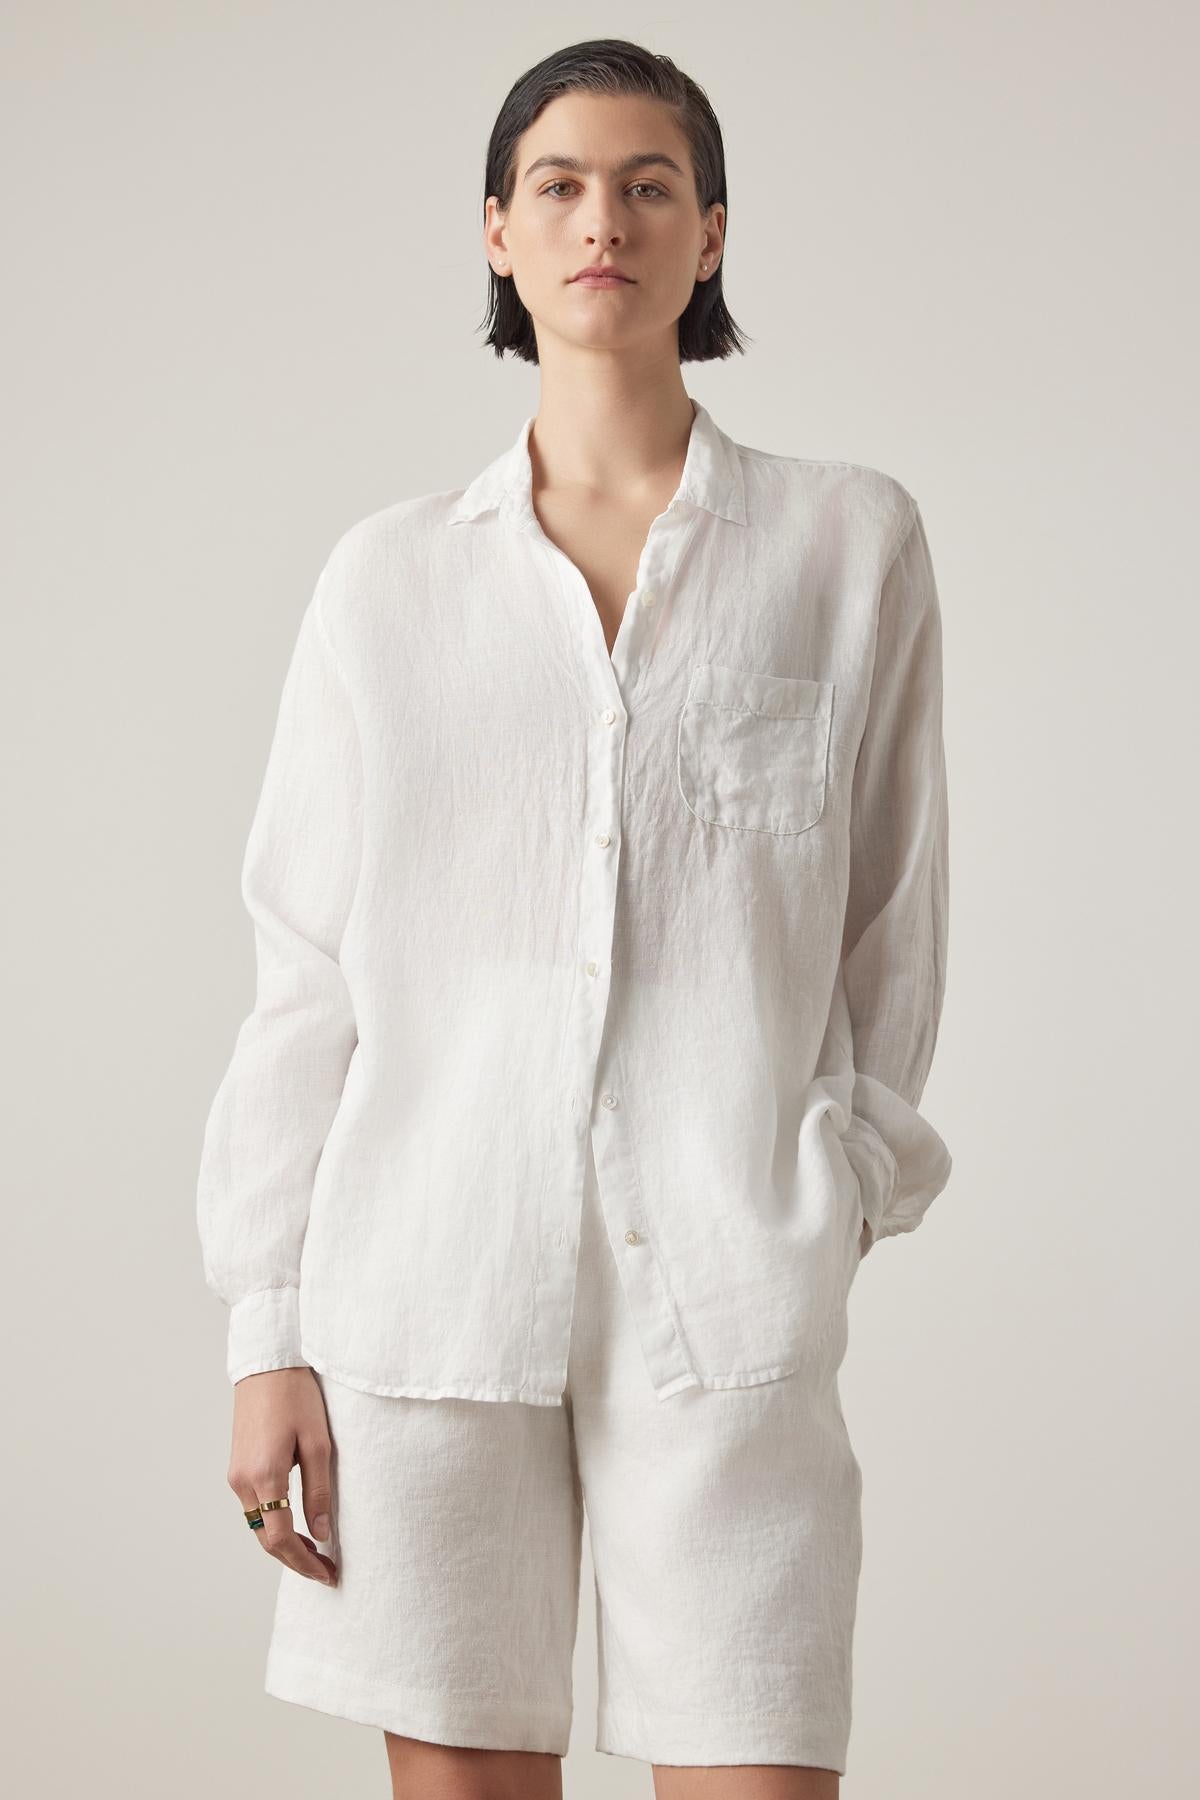 Person with short dark hair wearing a Velvet by Jenny Graham MULHOLLAND LINEN SHIRT with a scooped hemline and matching white shorts, standing against a plain background.-37018505117889